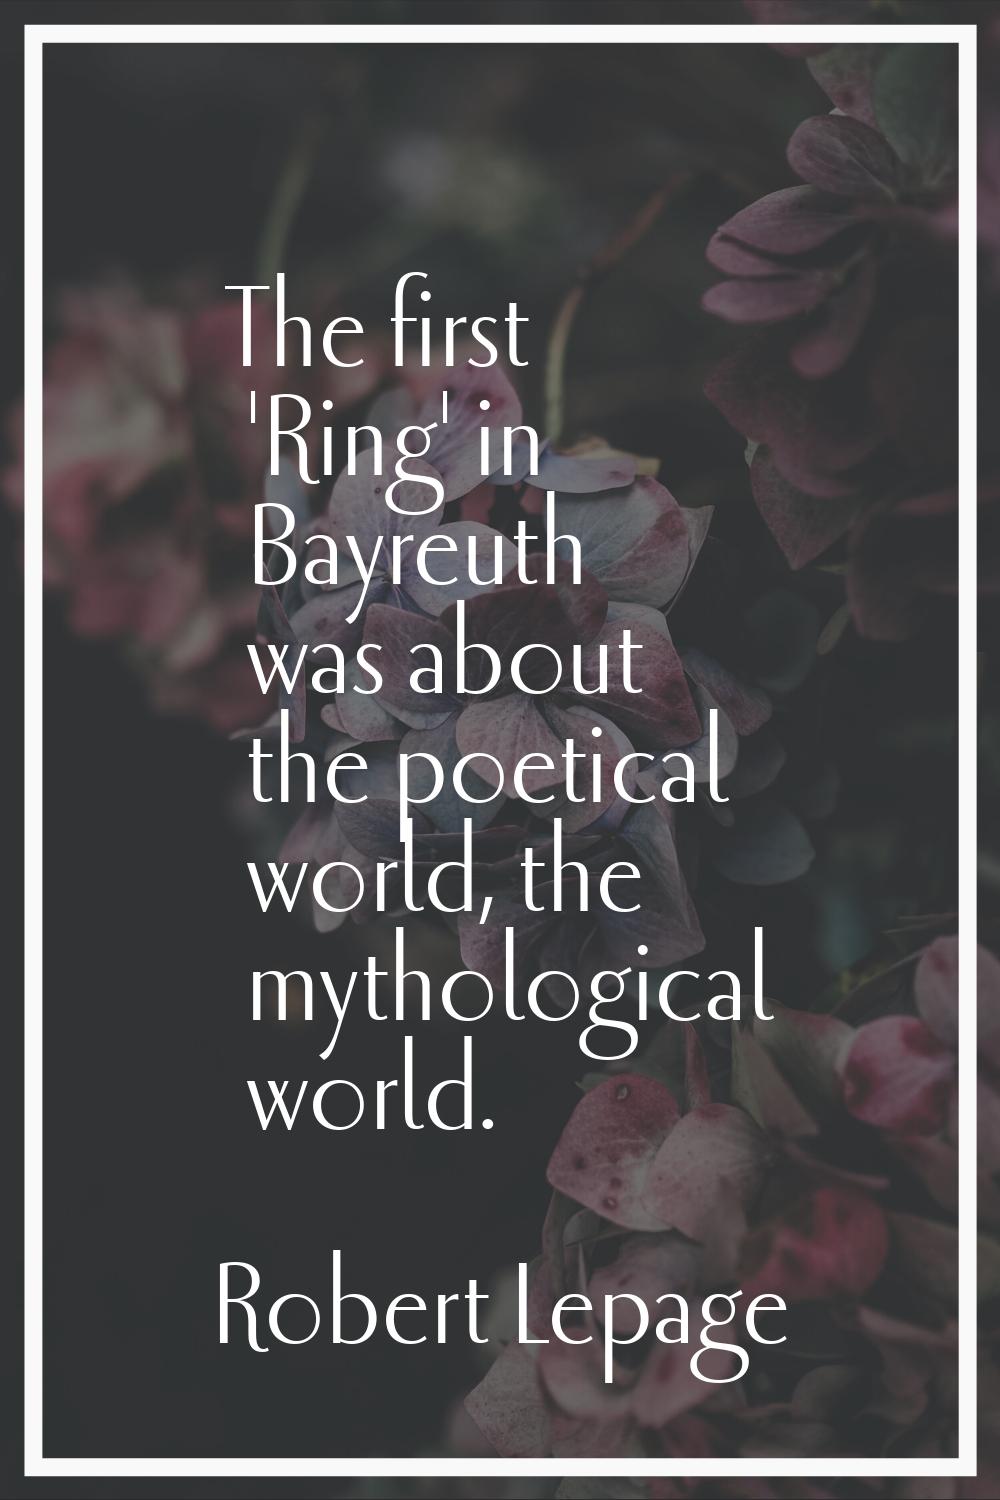 The first 'Ring' in Bayreuth was about the poetical world, the mythological world.